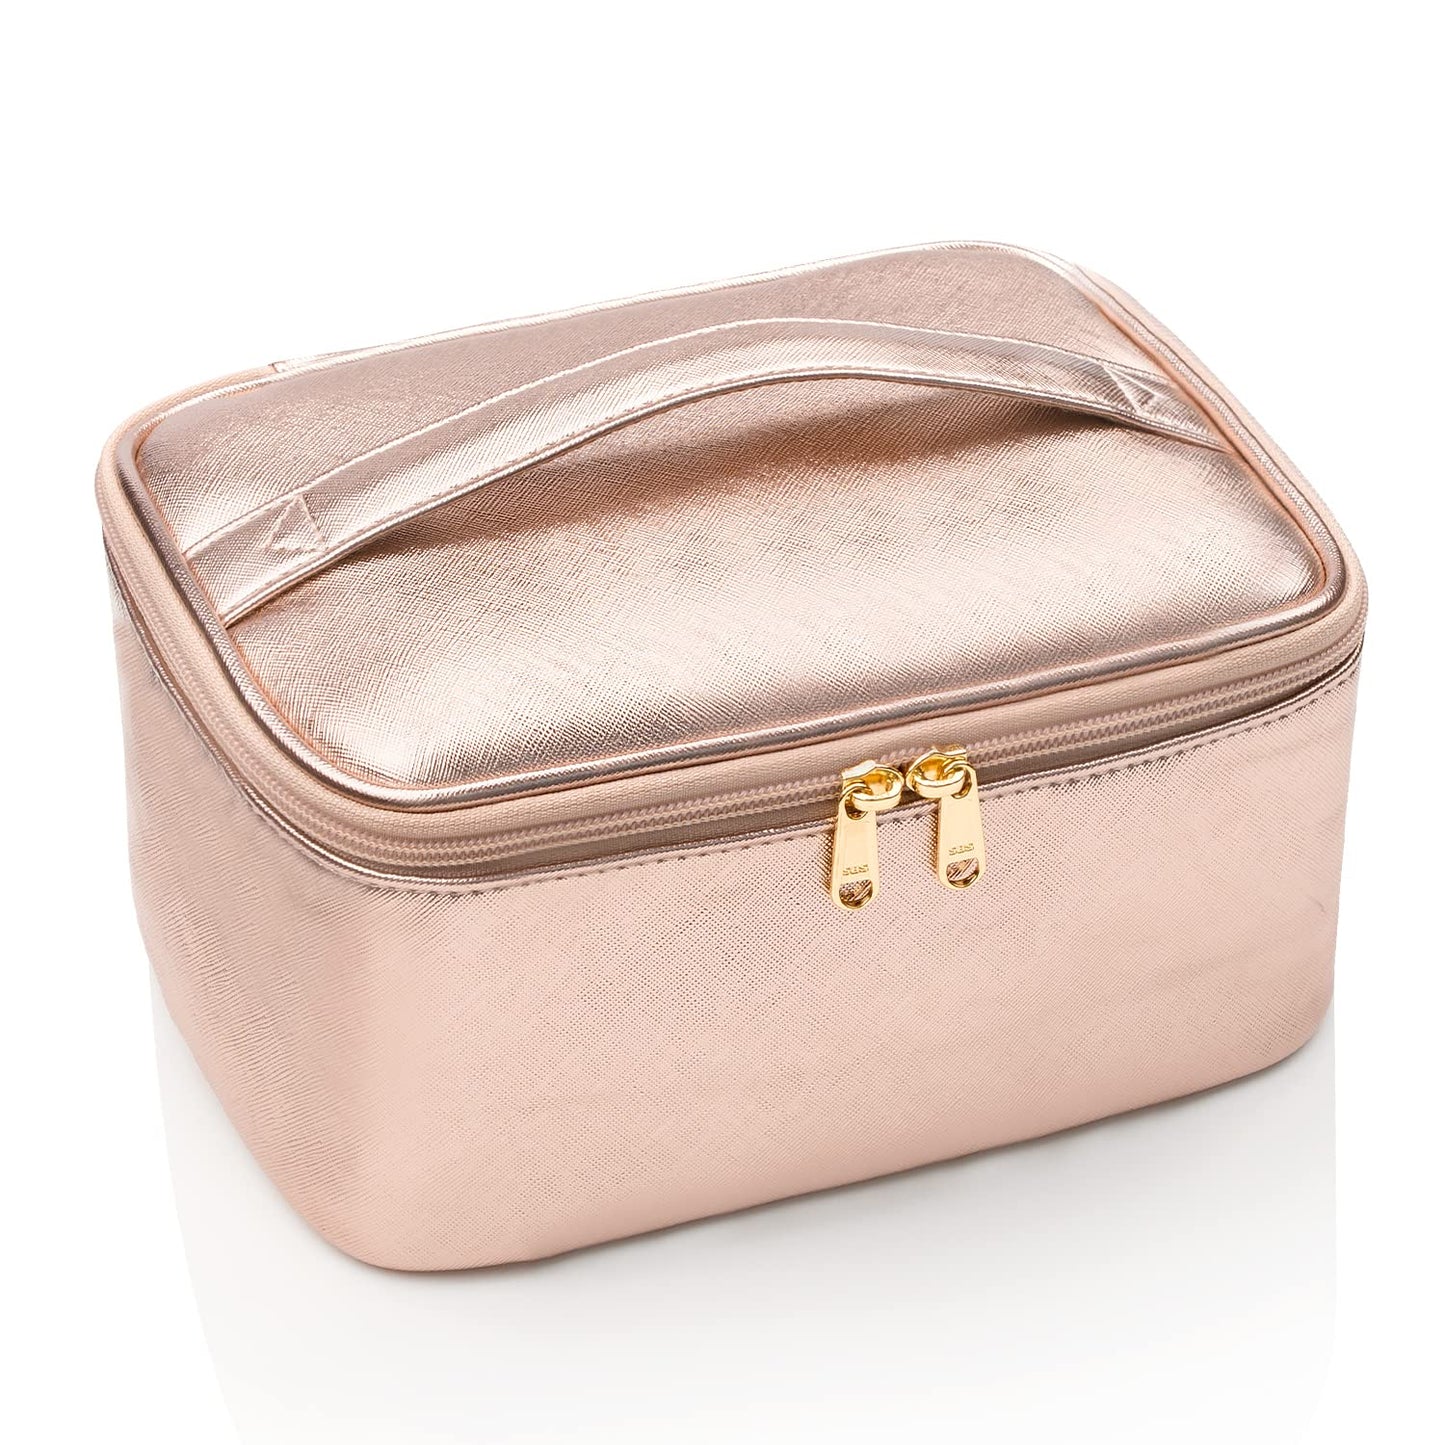 Large Portable Makeup Bag with Toiletries Brushes Slots and Divider-Rose Gold